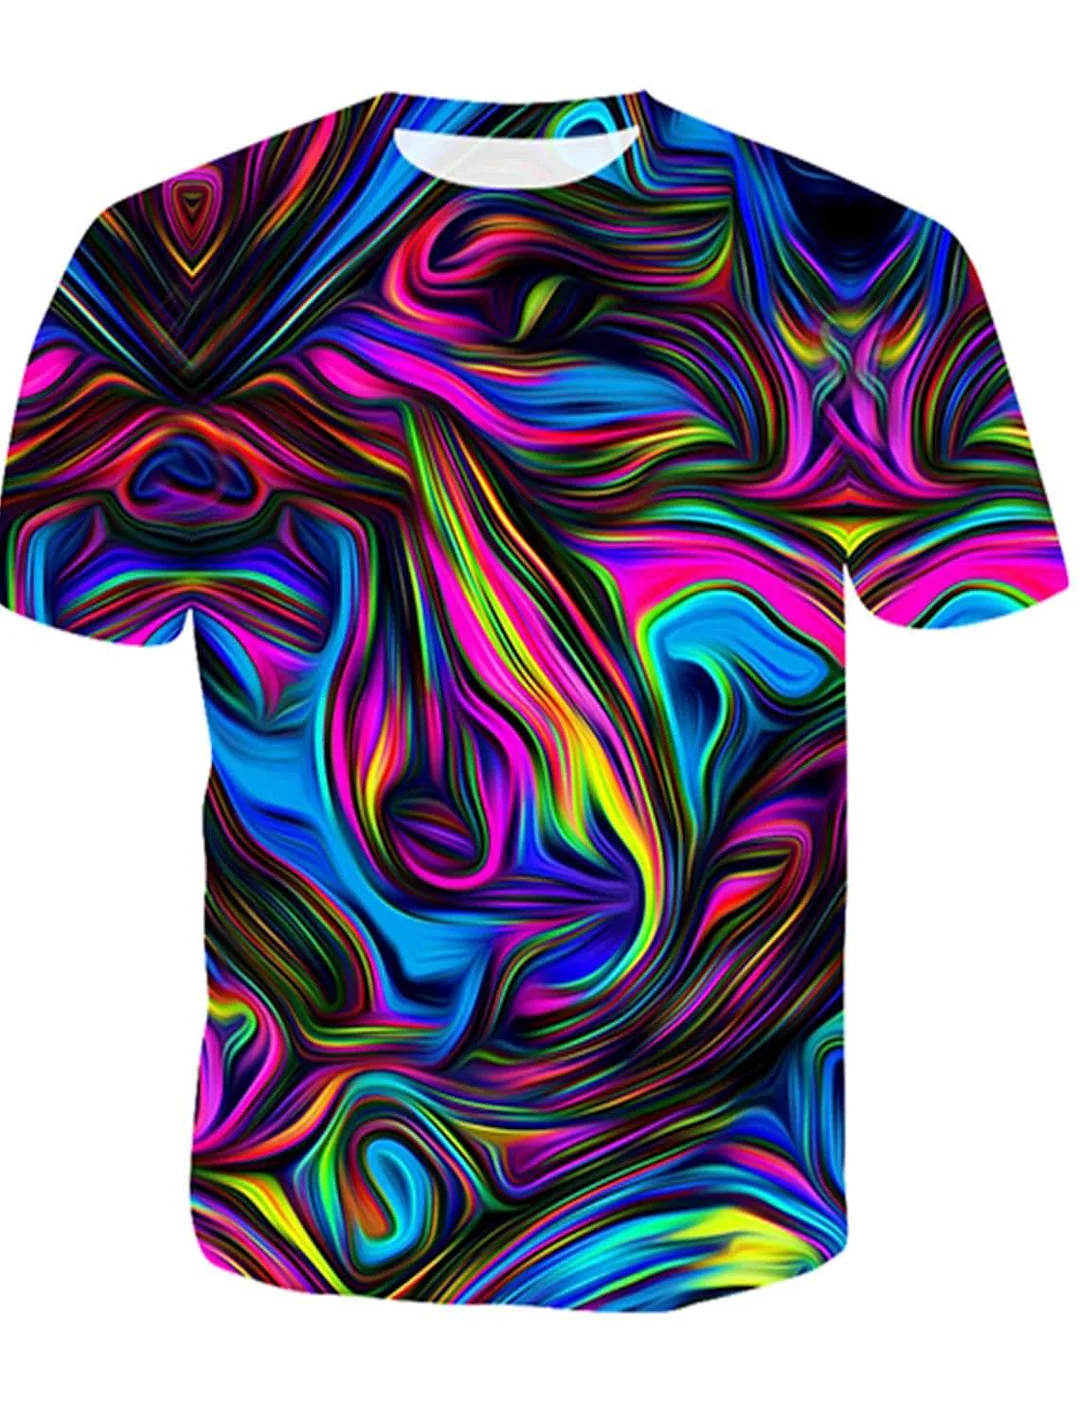 Men's T-Shirt Graphic Abstract Print Short Sleeve Daily Tops